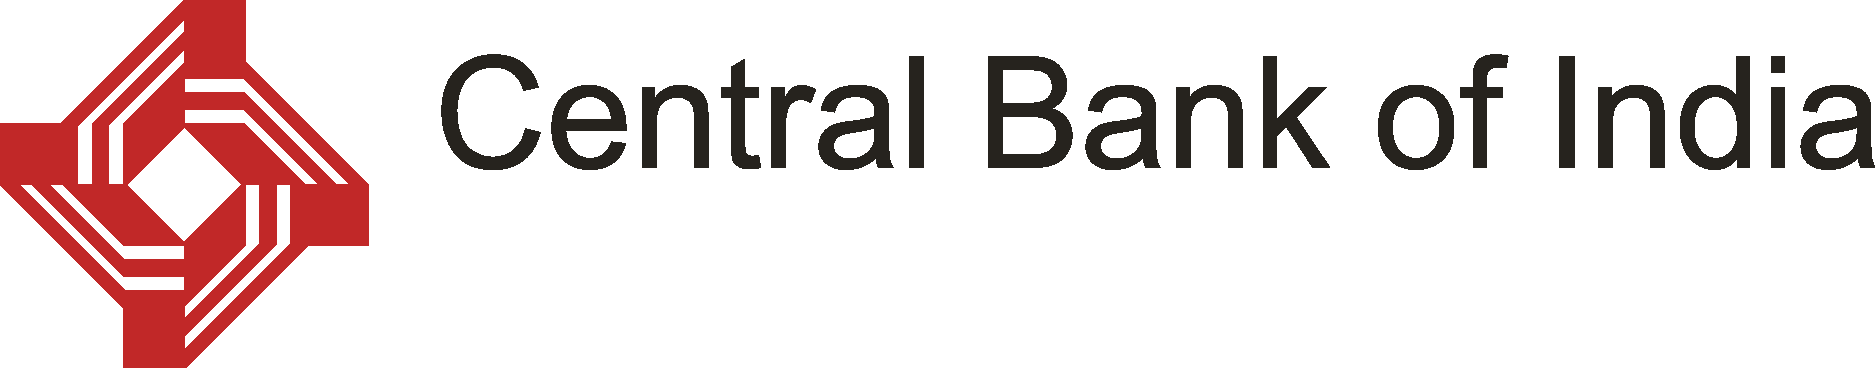 Central Bank of The UAE - Apps on Google Play